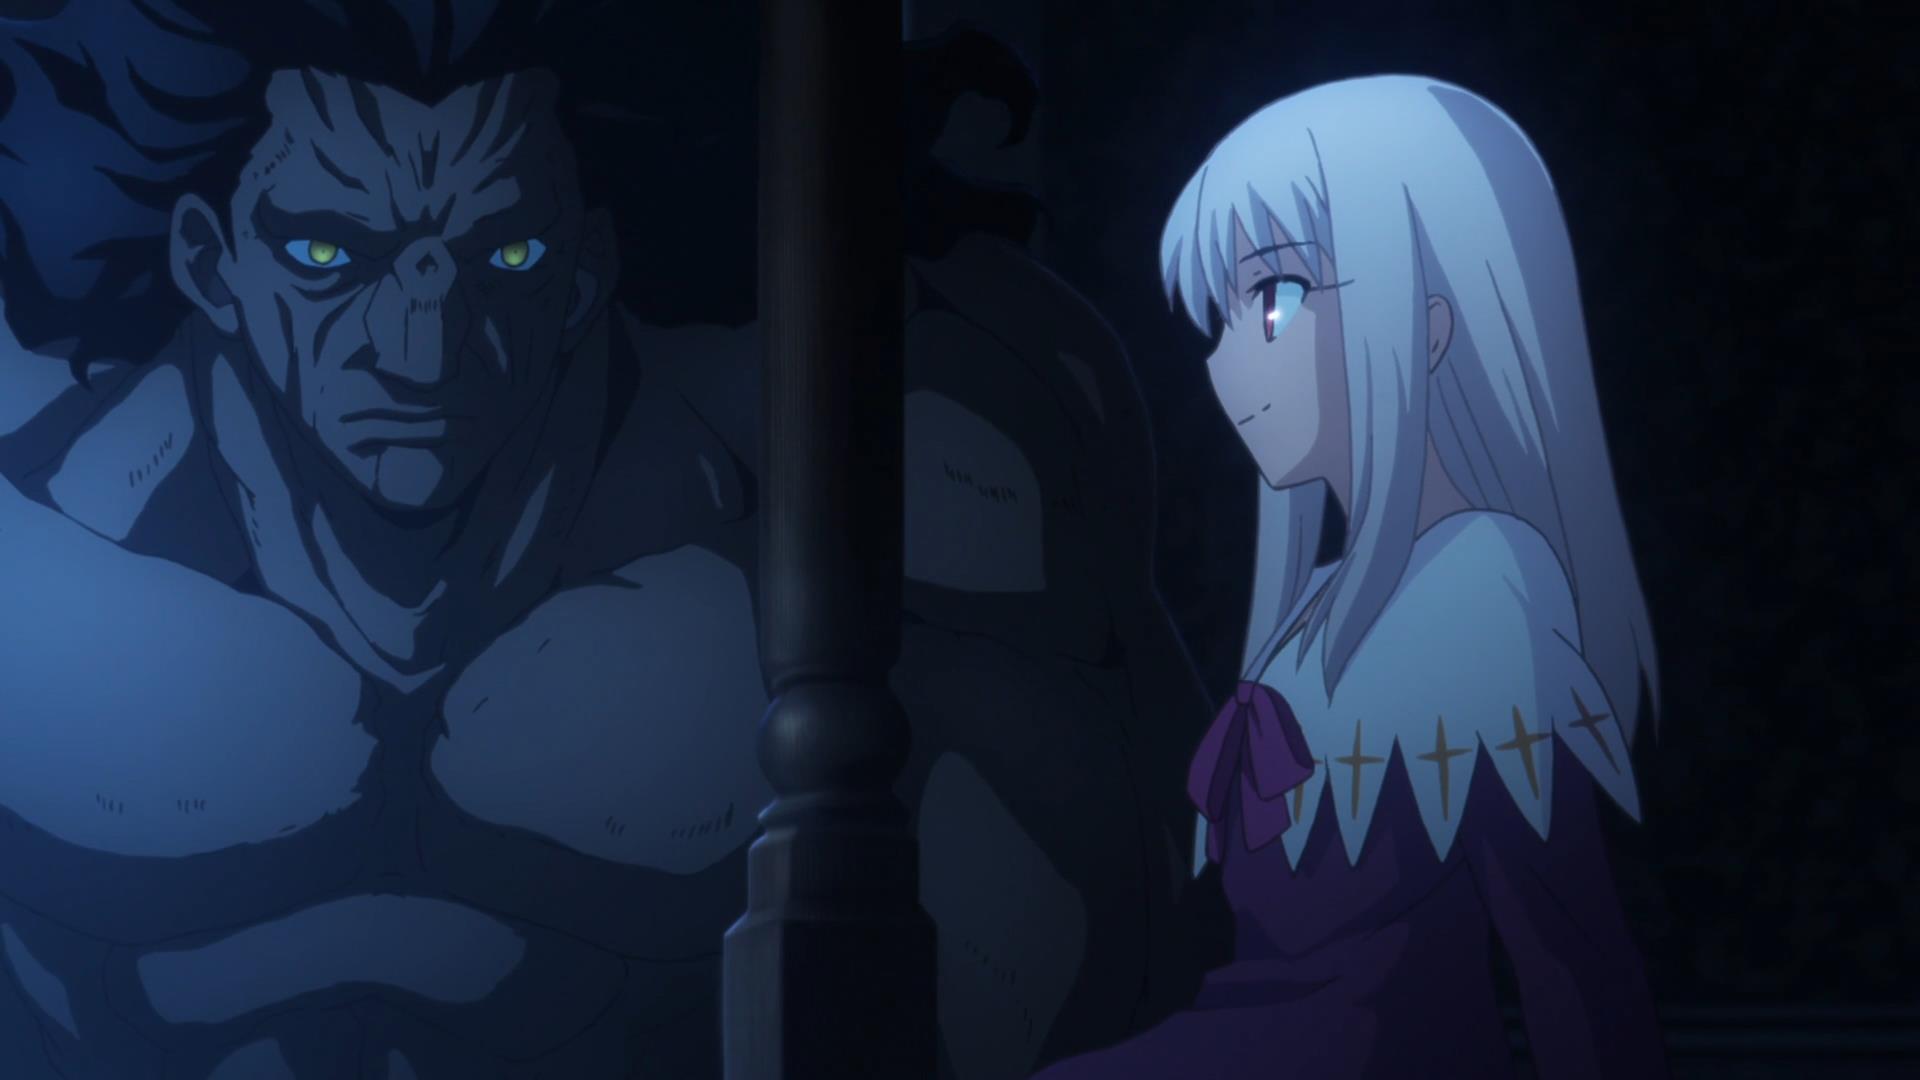 Anime Mini Review]: Fate/Stay Night (+Unlimited Blade Works Movie)